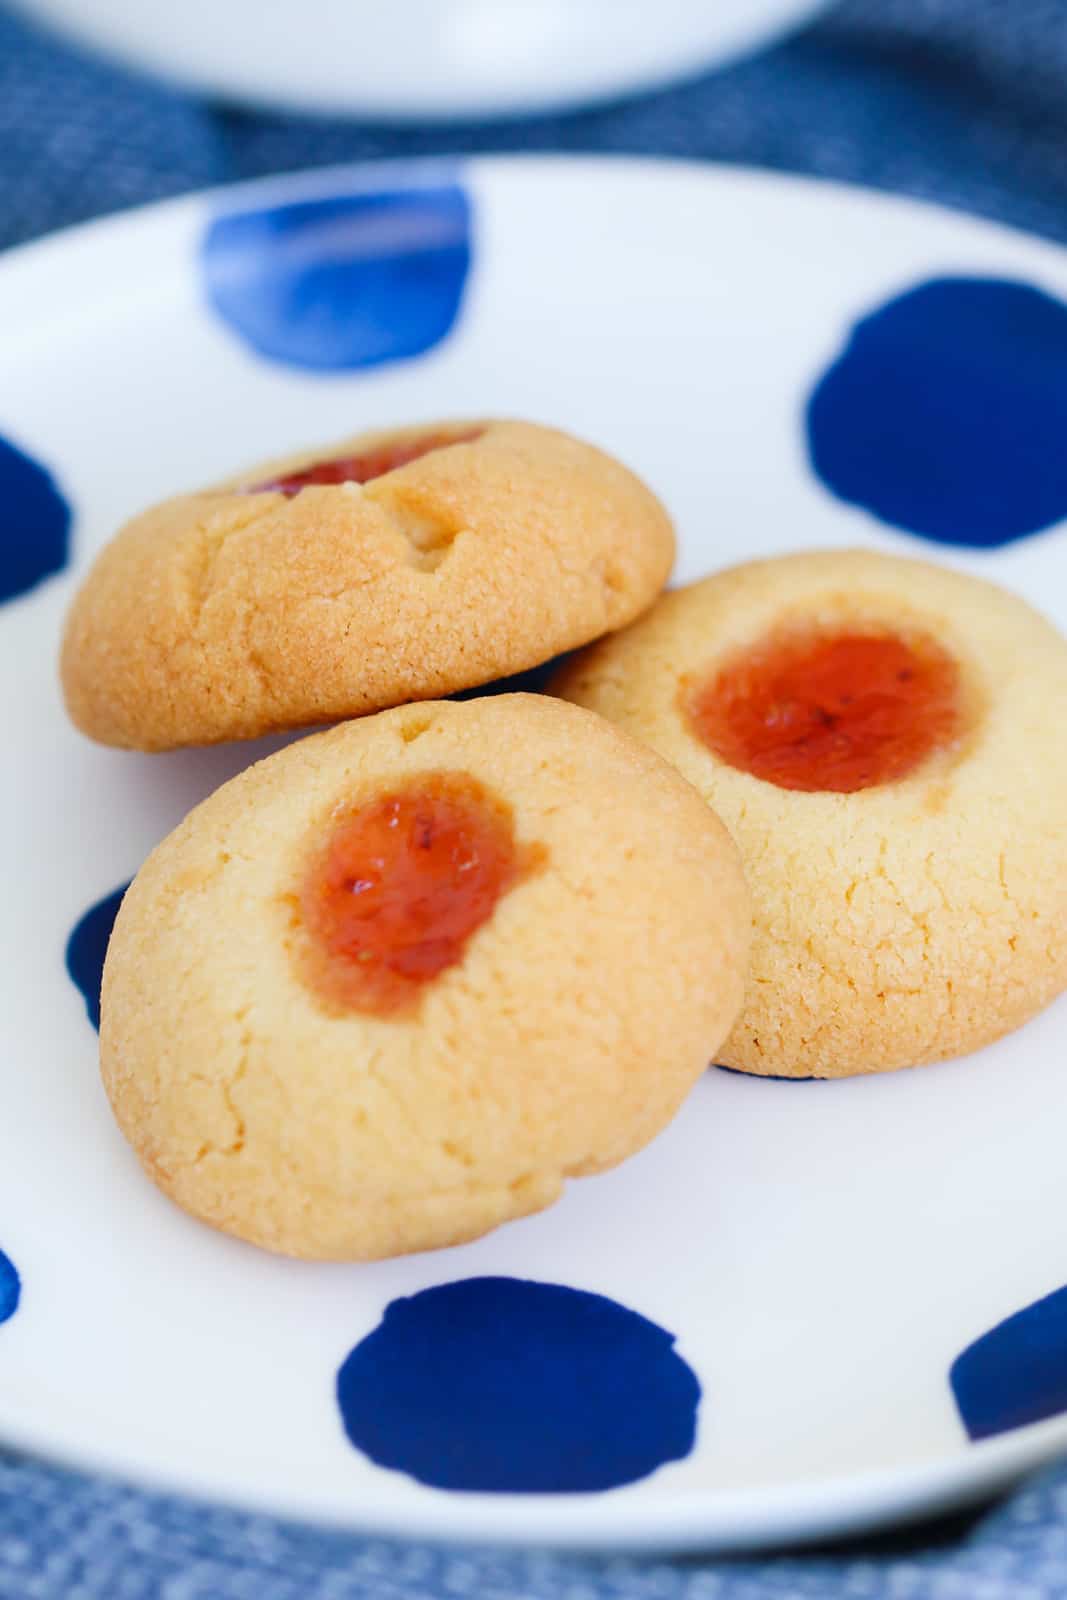 Three thumbprint cookies with strawberry jam on a blue and white plate.